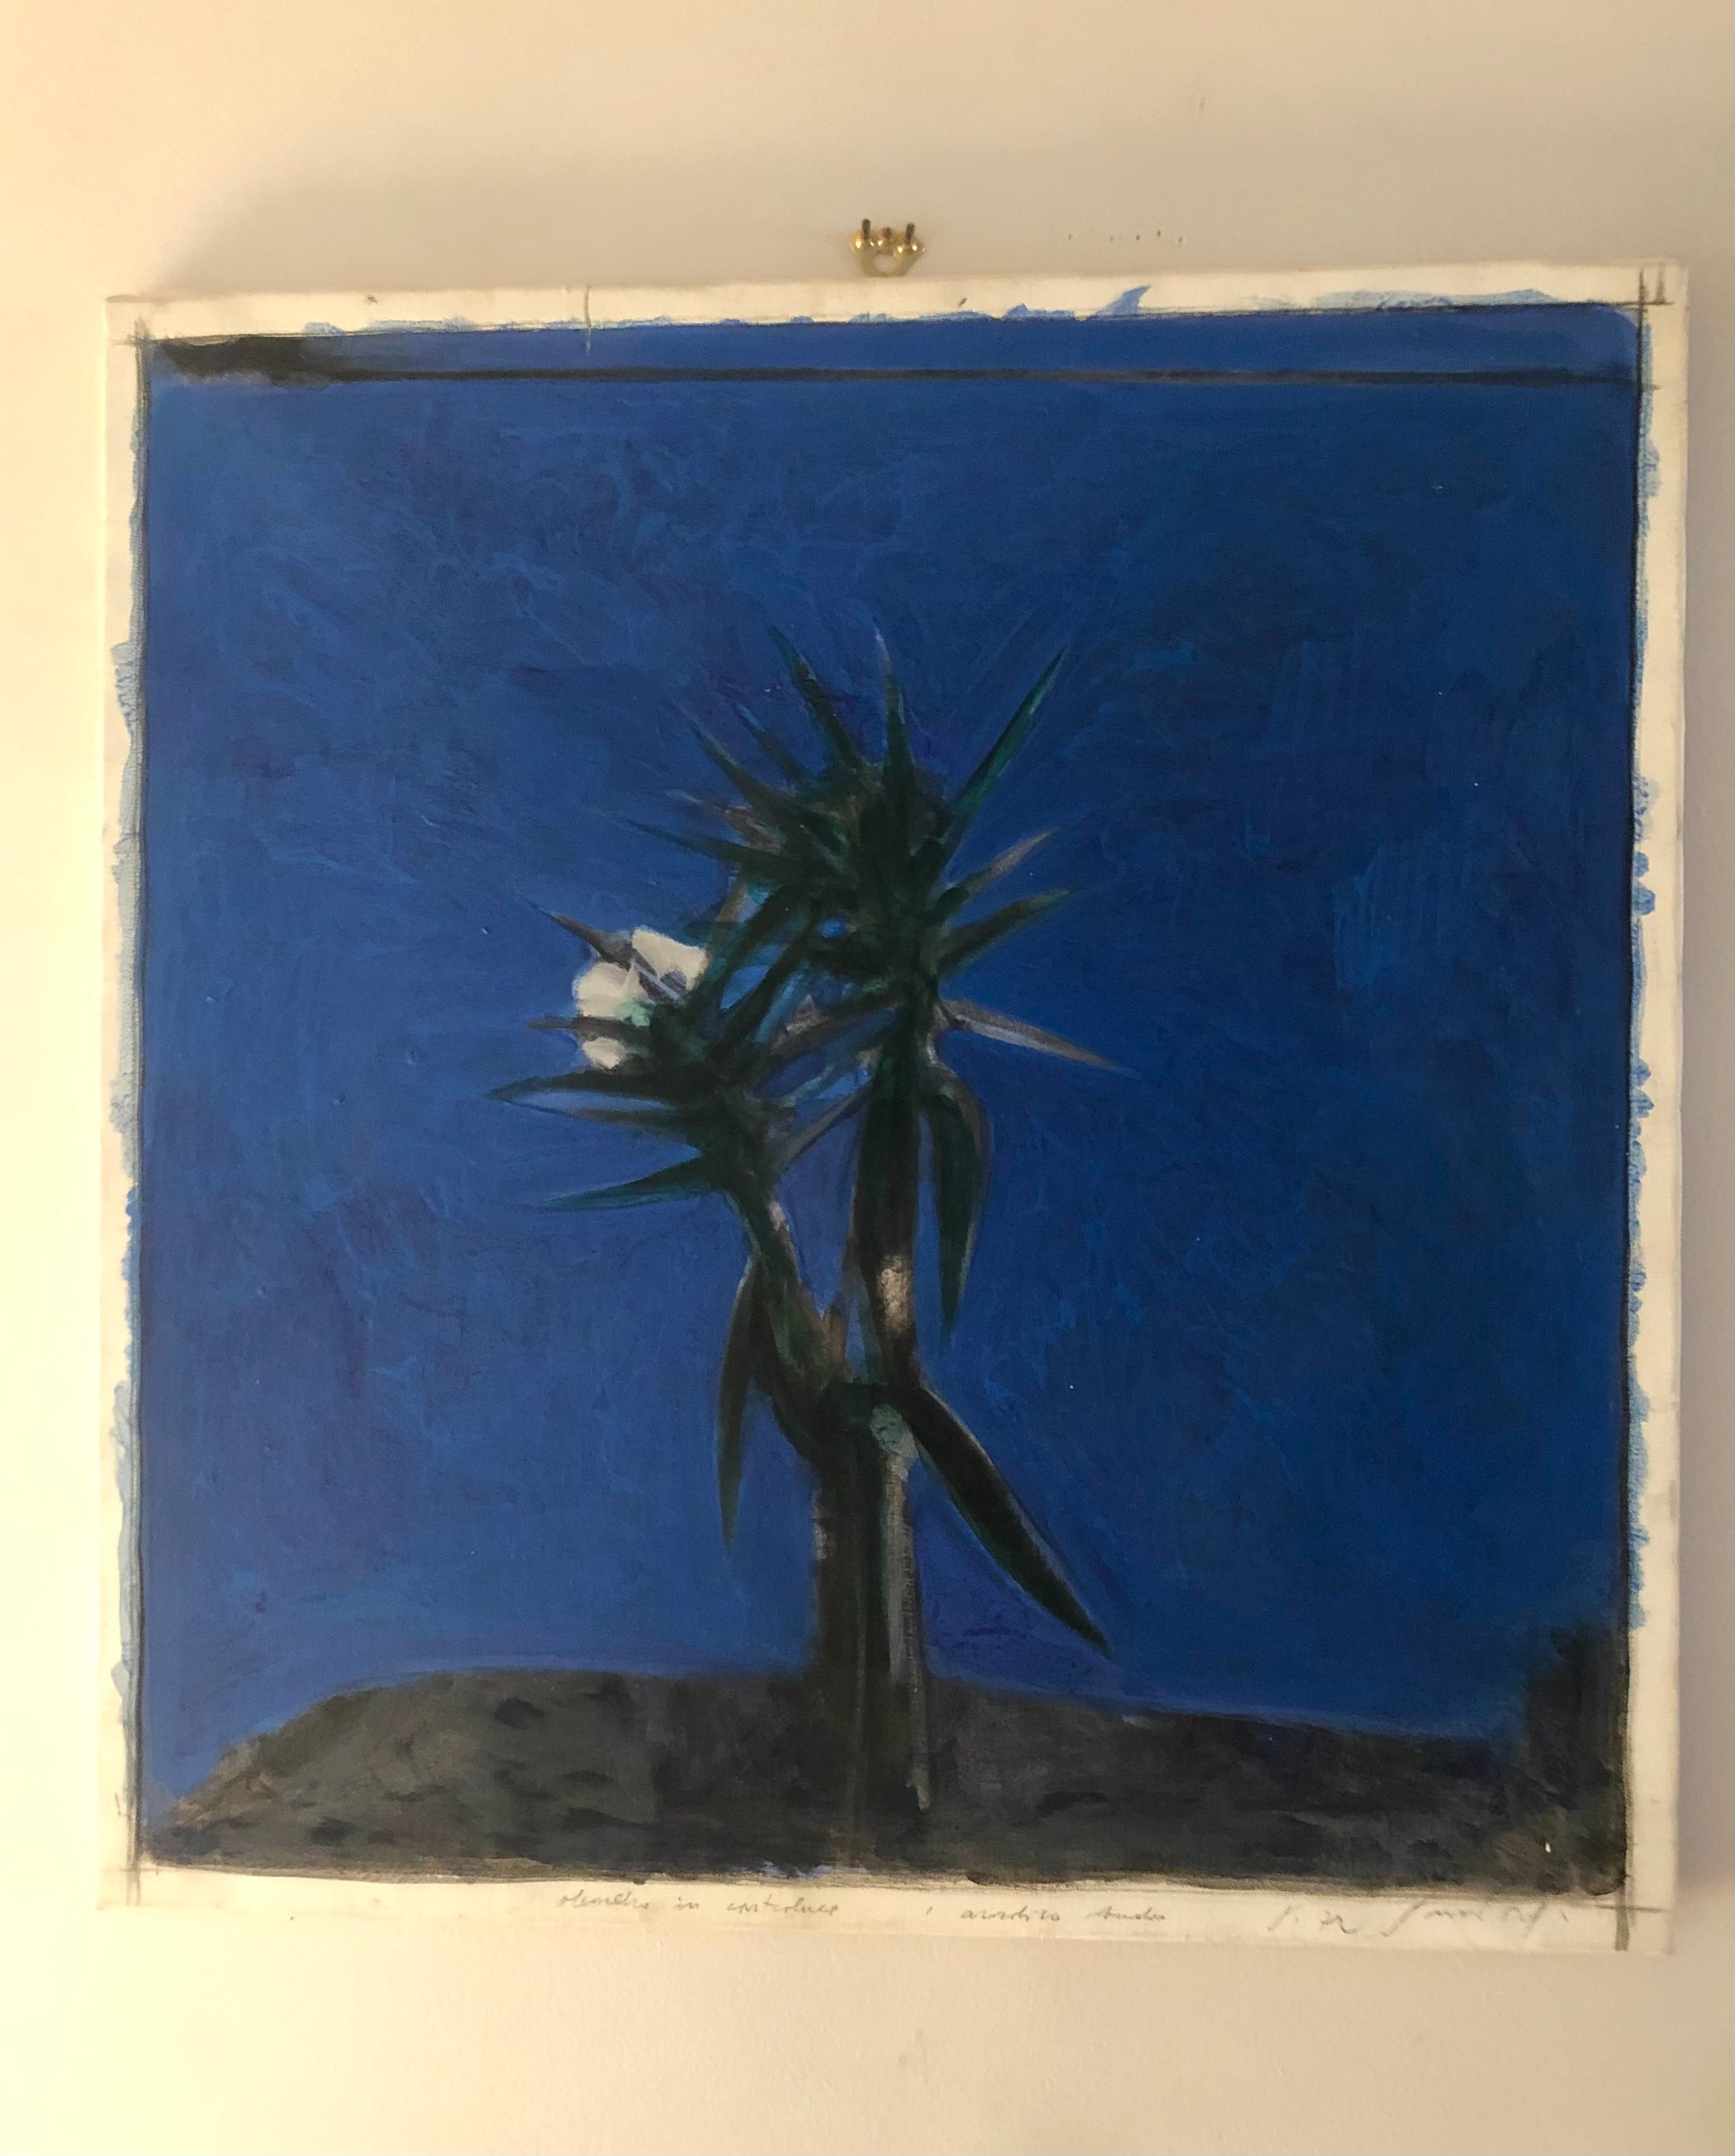 Piero Guccione (Italy, 1935-2018), “Oleandro in Controluce” (Oleander in Silhouette ), titled and signed lower margins, titled, signed and dated verso, with Galleria Il Gabbiano, Rome label to stretcher. 

Piero Guccione was a leading figure in the